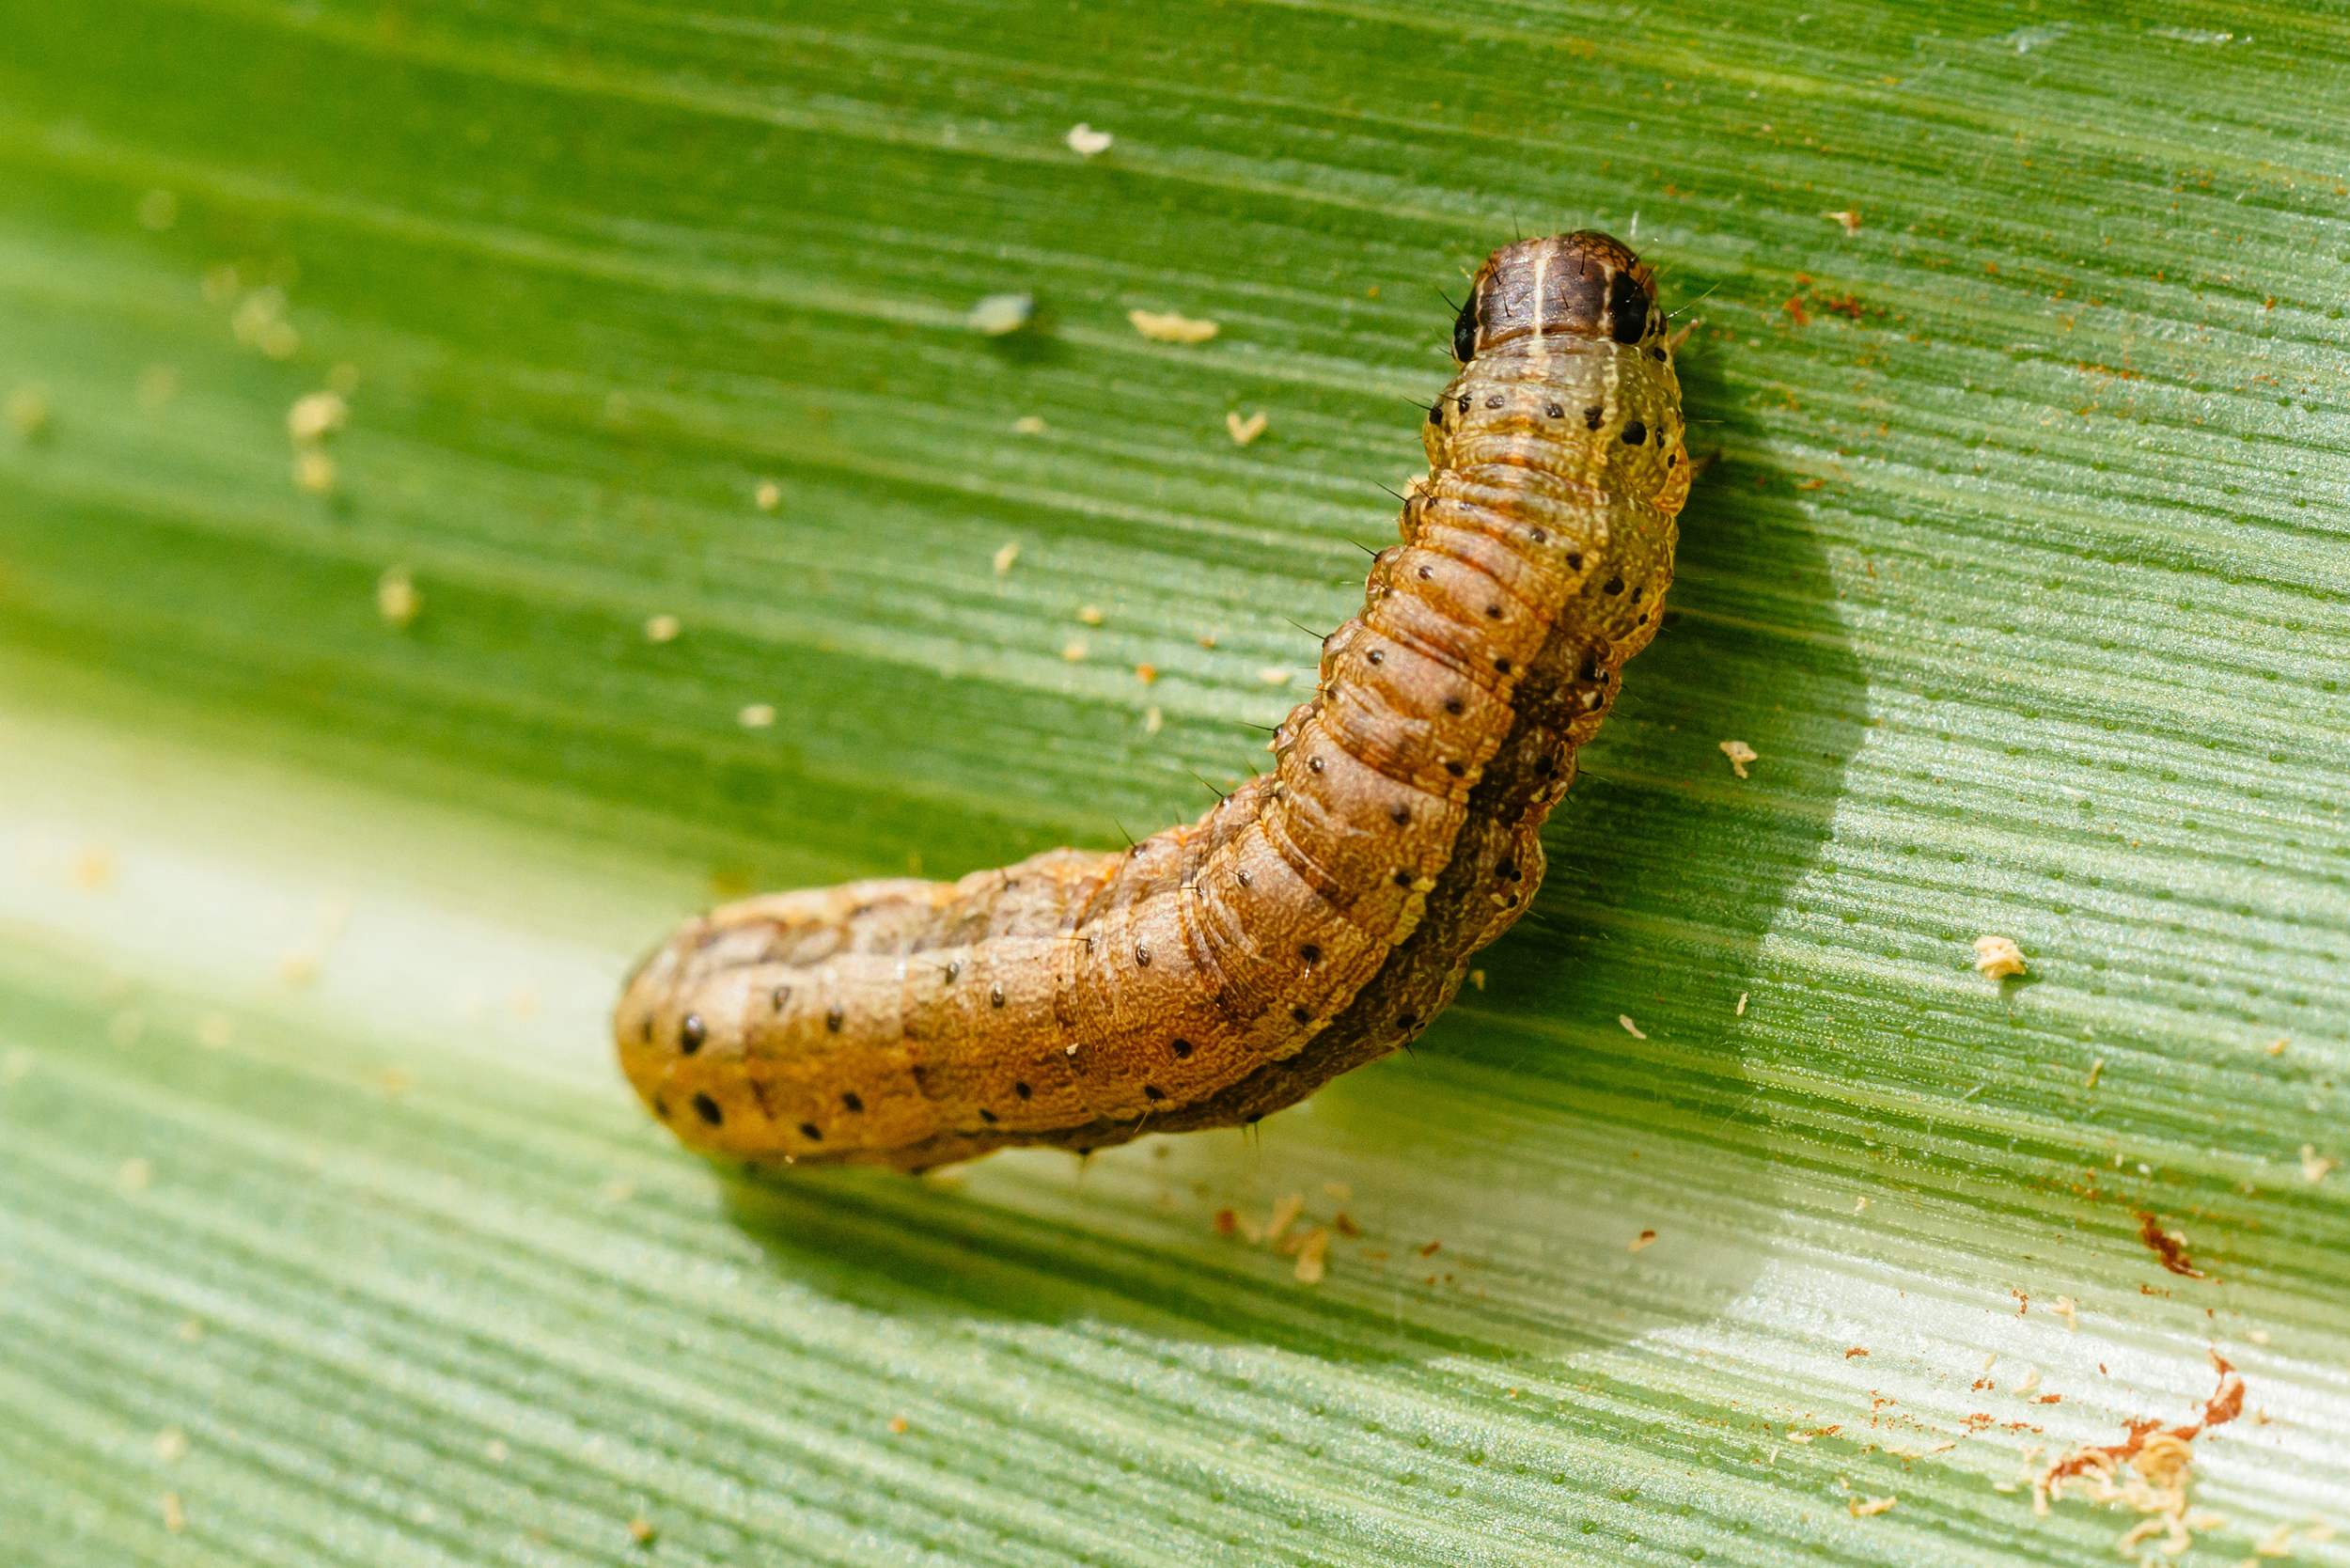 Caterpillar-Grown Flu Vaccine Protects Better Than Egg-Incubated Vaccine